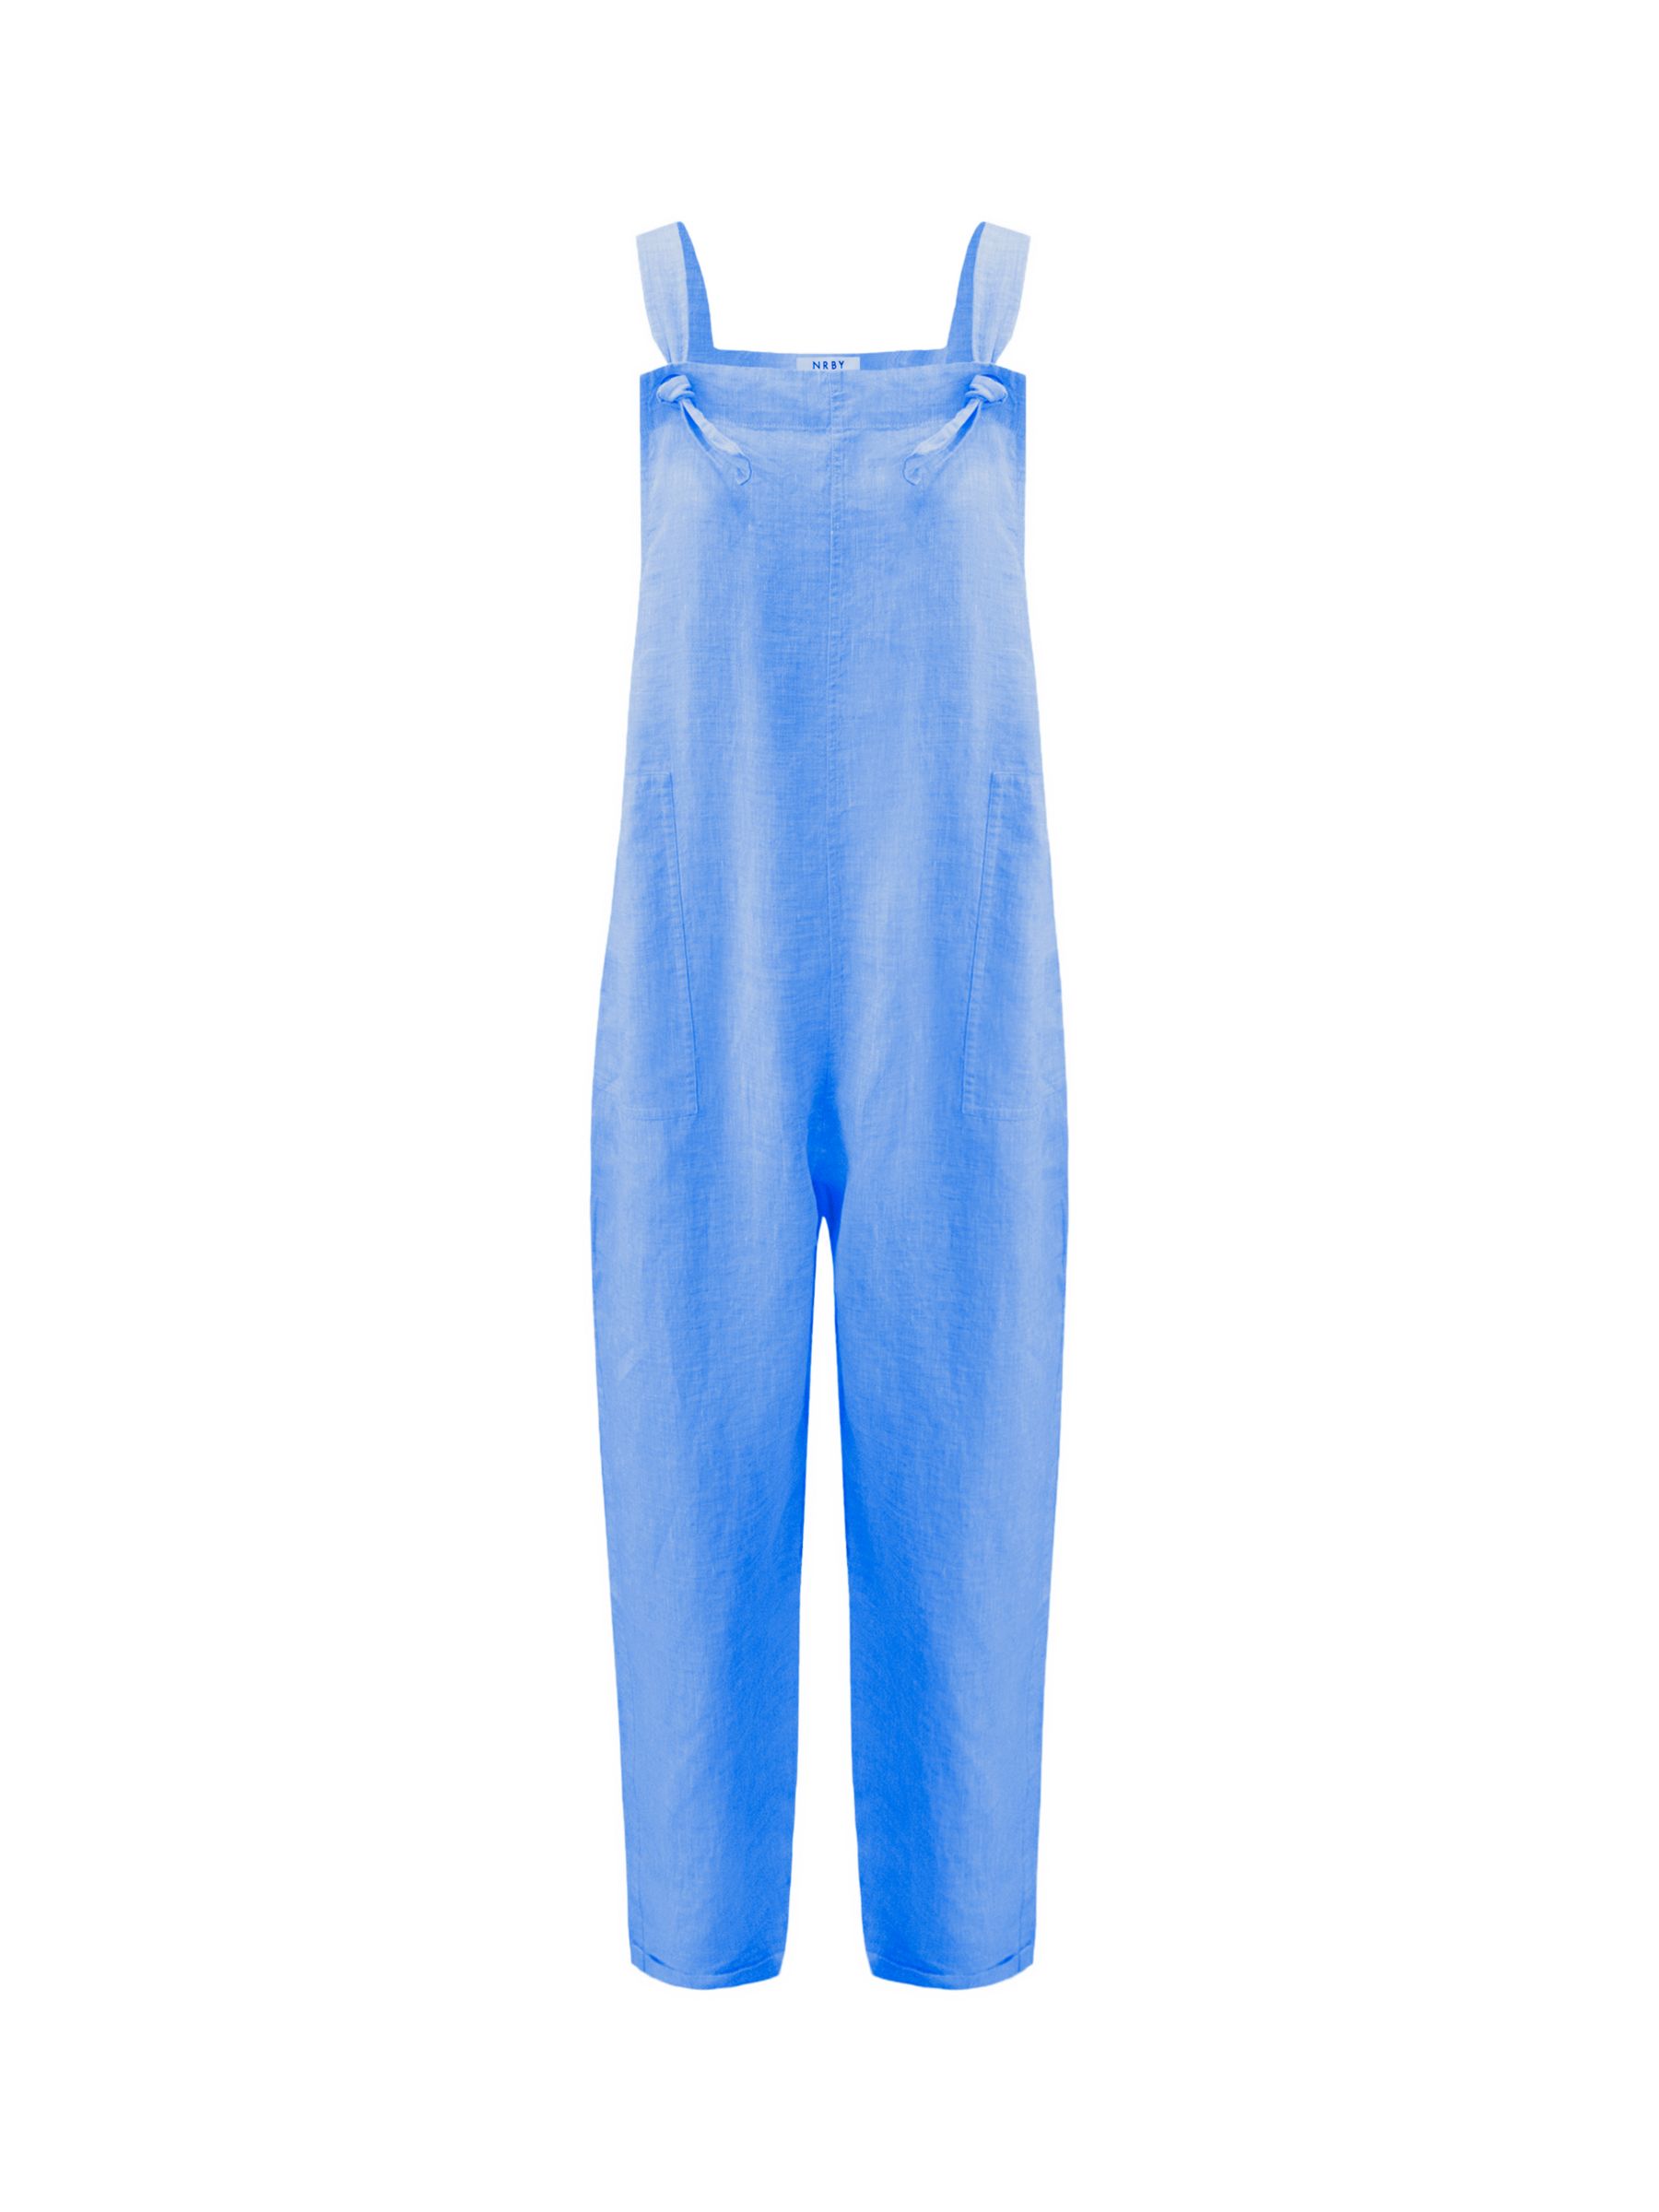 NRBY Carrie Linen Dungarees, Bright Blue, S